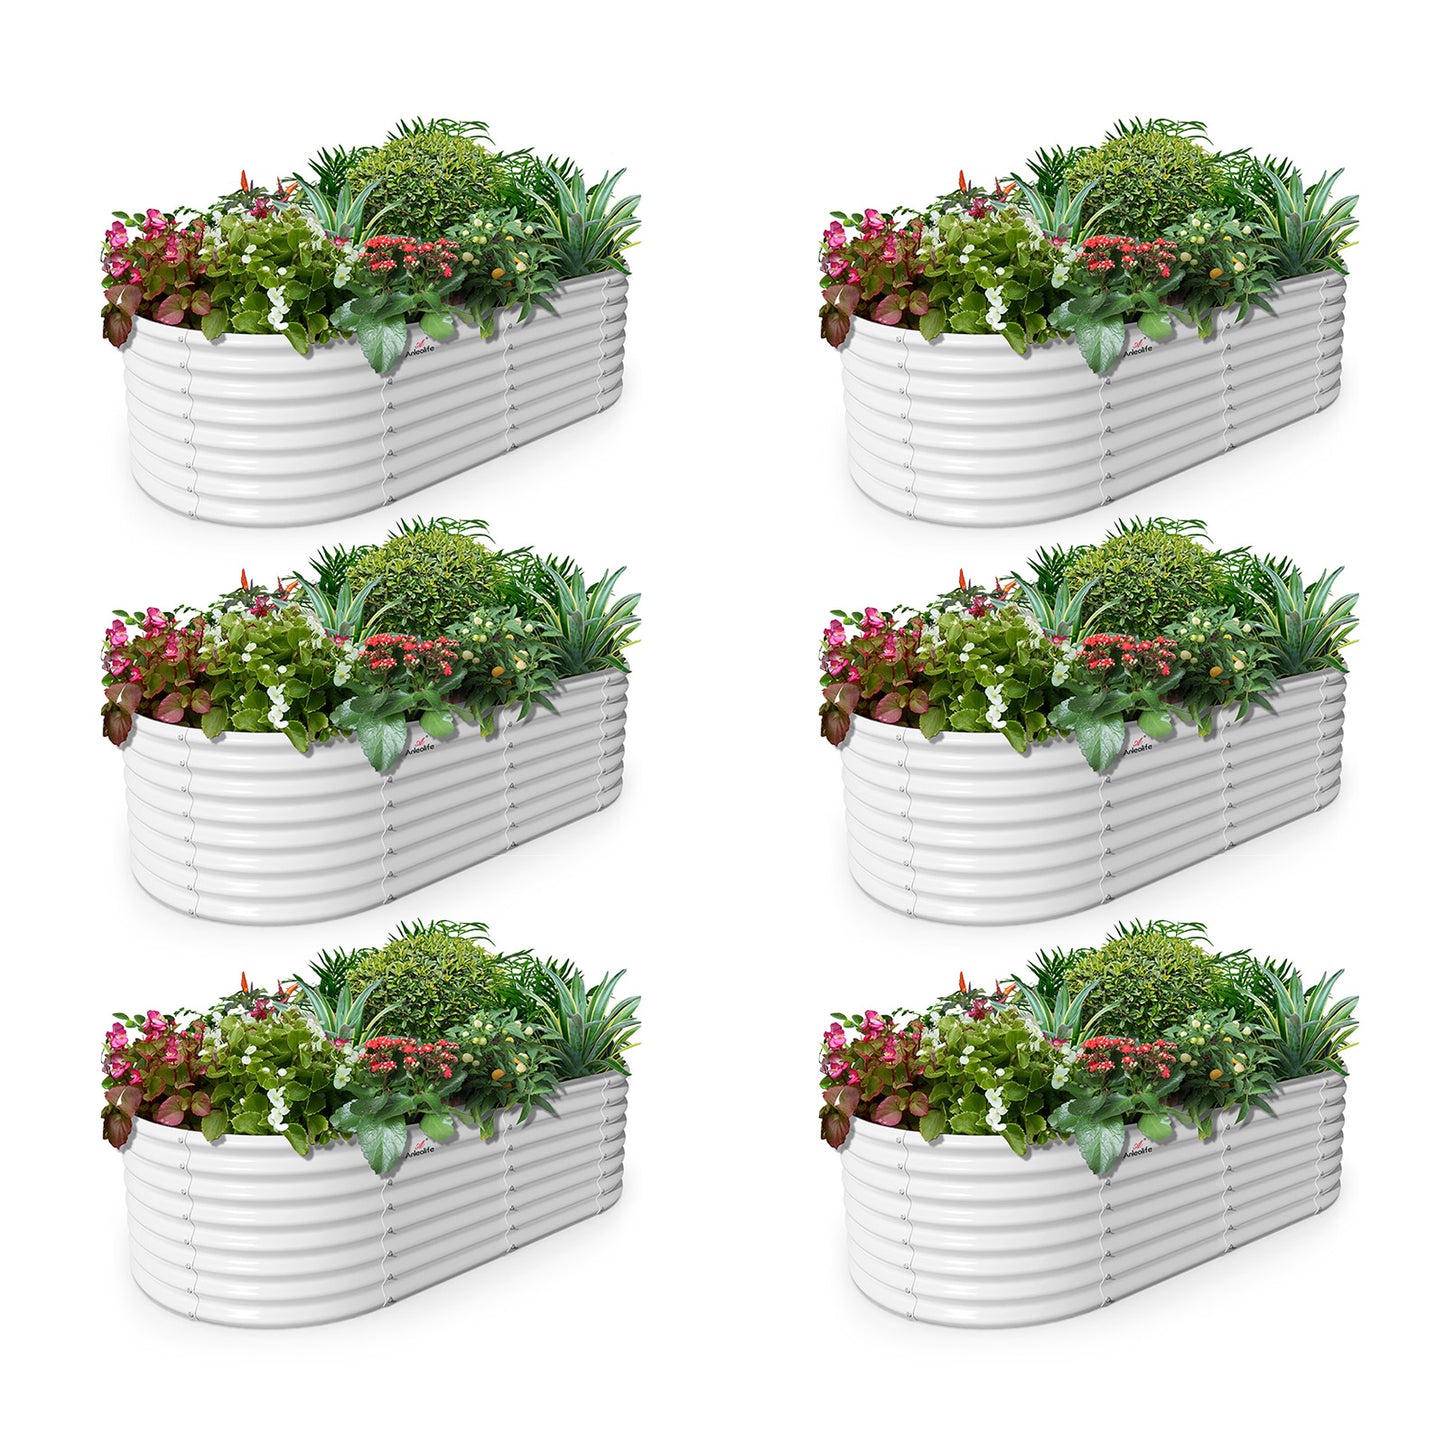 Set of 6: 6x3x2ft Oval Metal Raised Garden Beds (White)